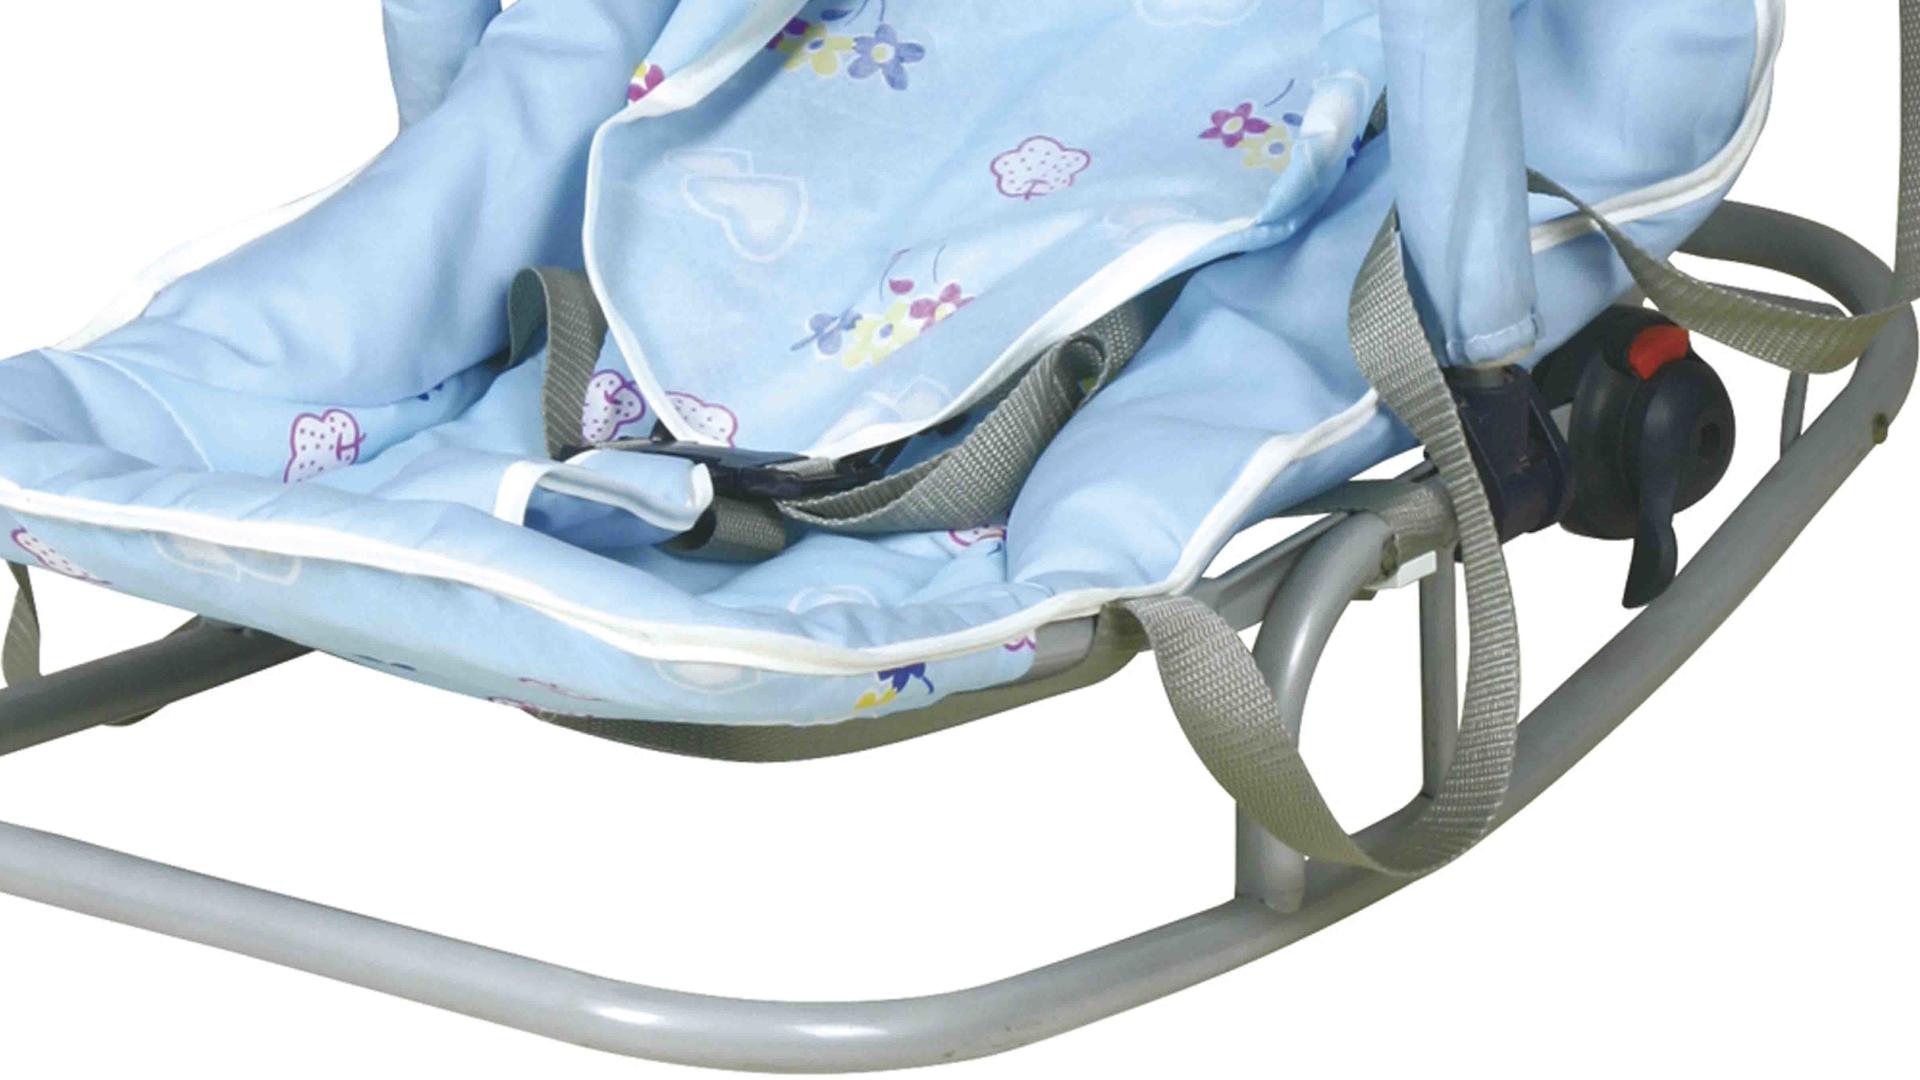 wholesale play designed baby baby rocking chairs for sale Aoqi Brand